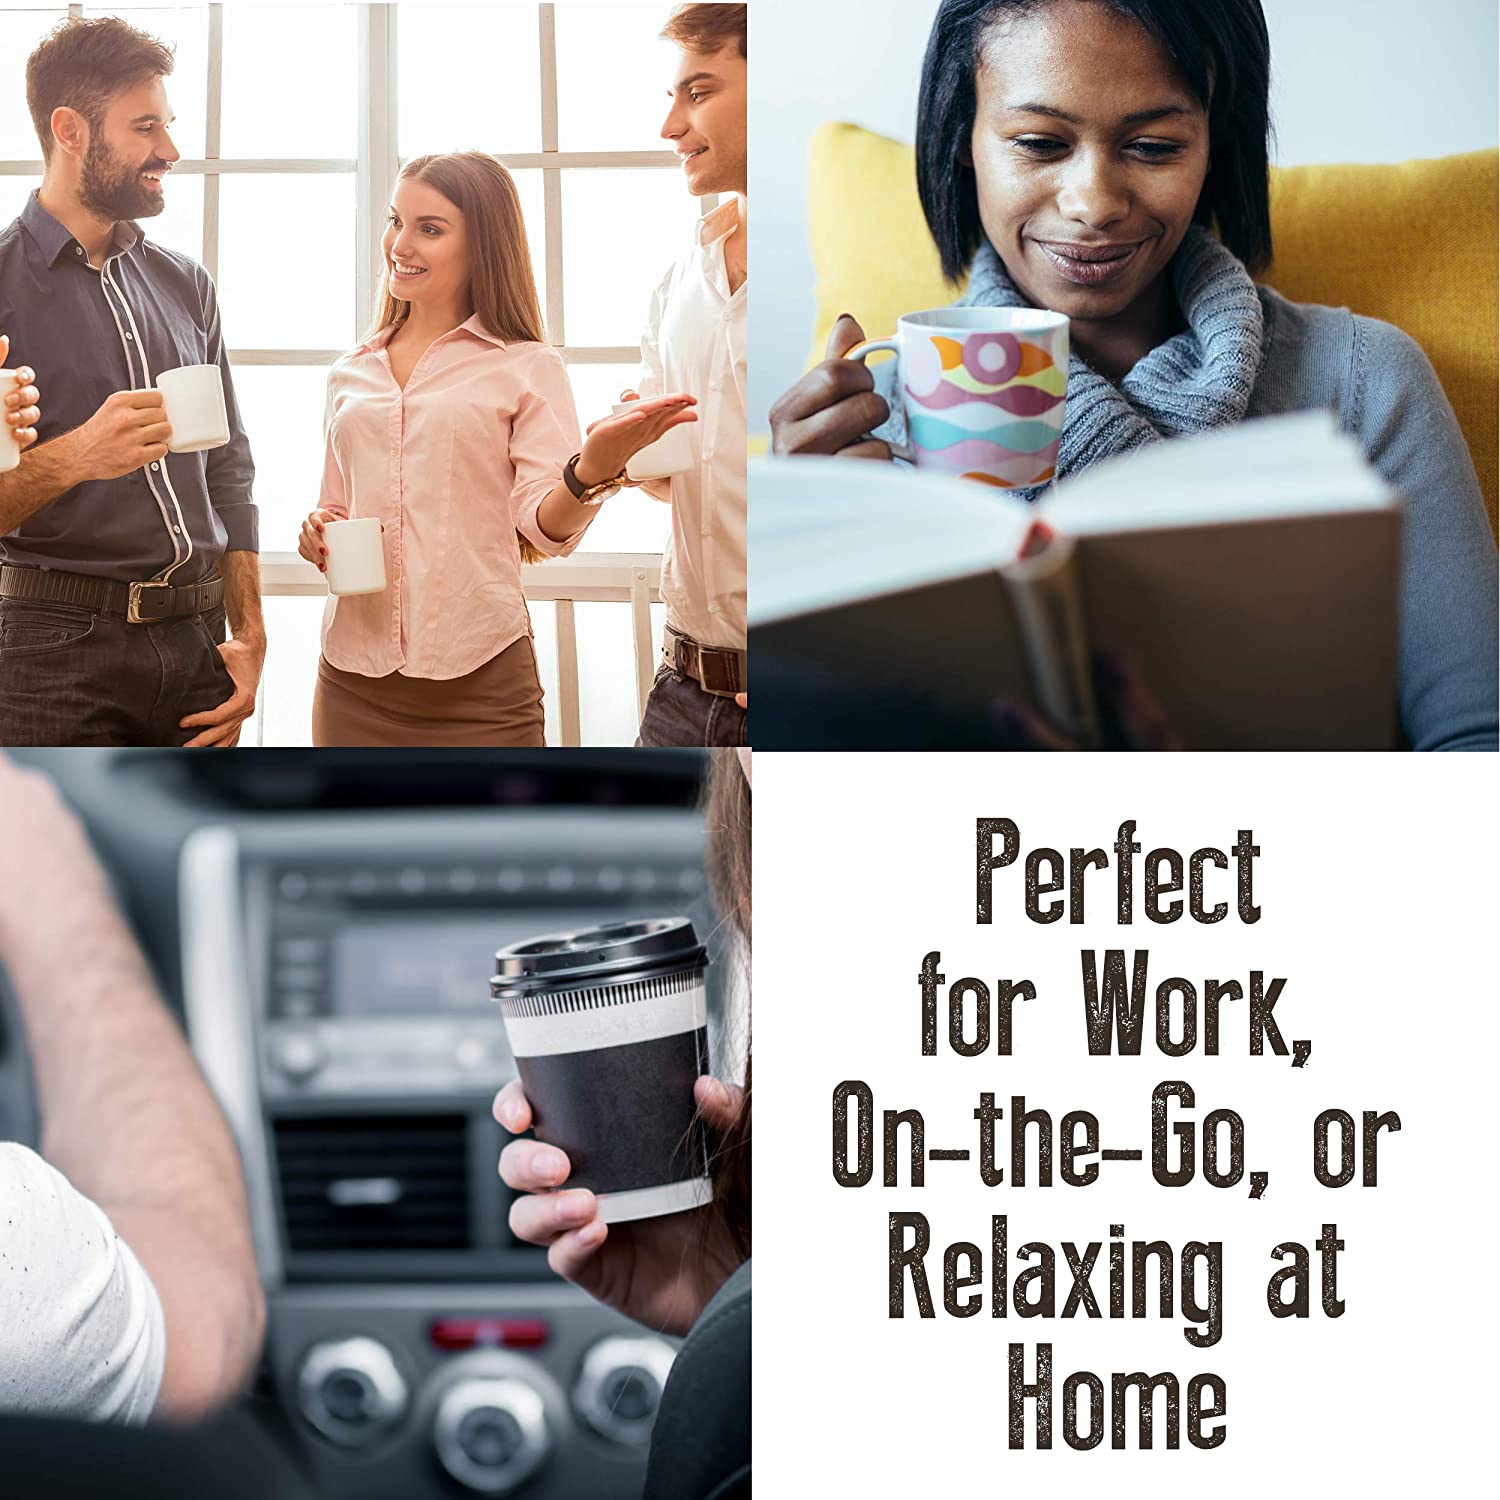 A collage of 4 images. 3 images are of people drinking coffee. The 4th image has text which reads, 'Perfect for work, on the go, or relaxing at home.'